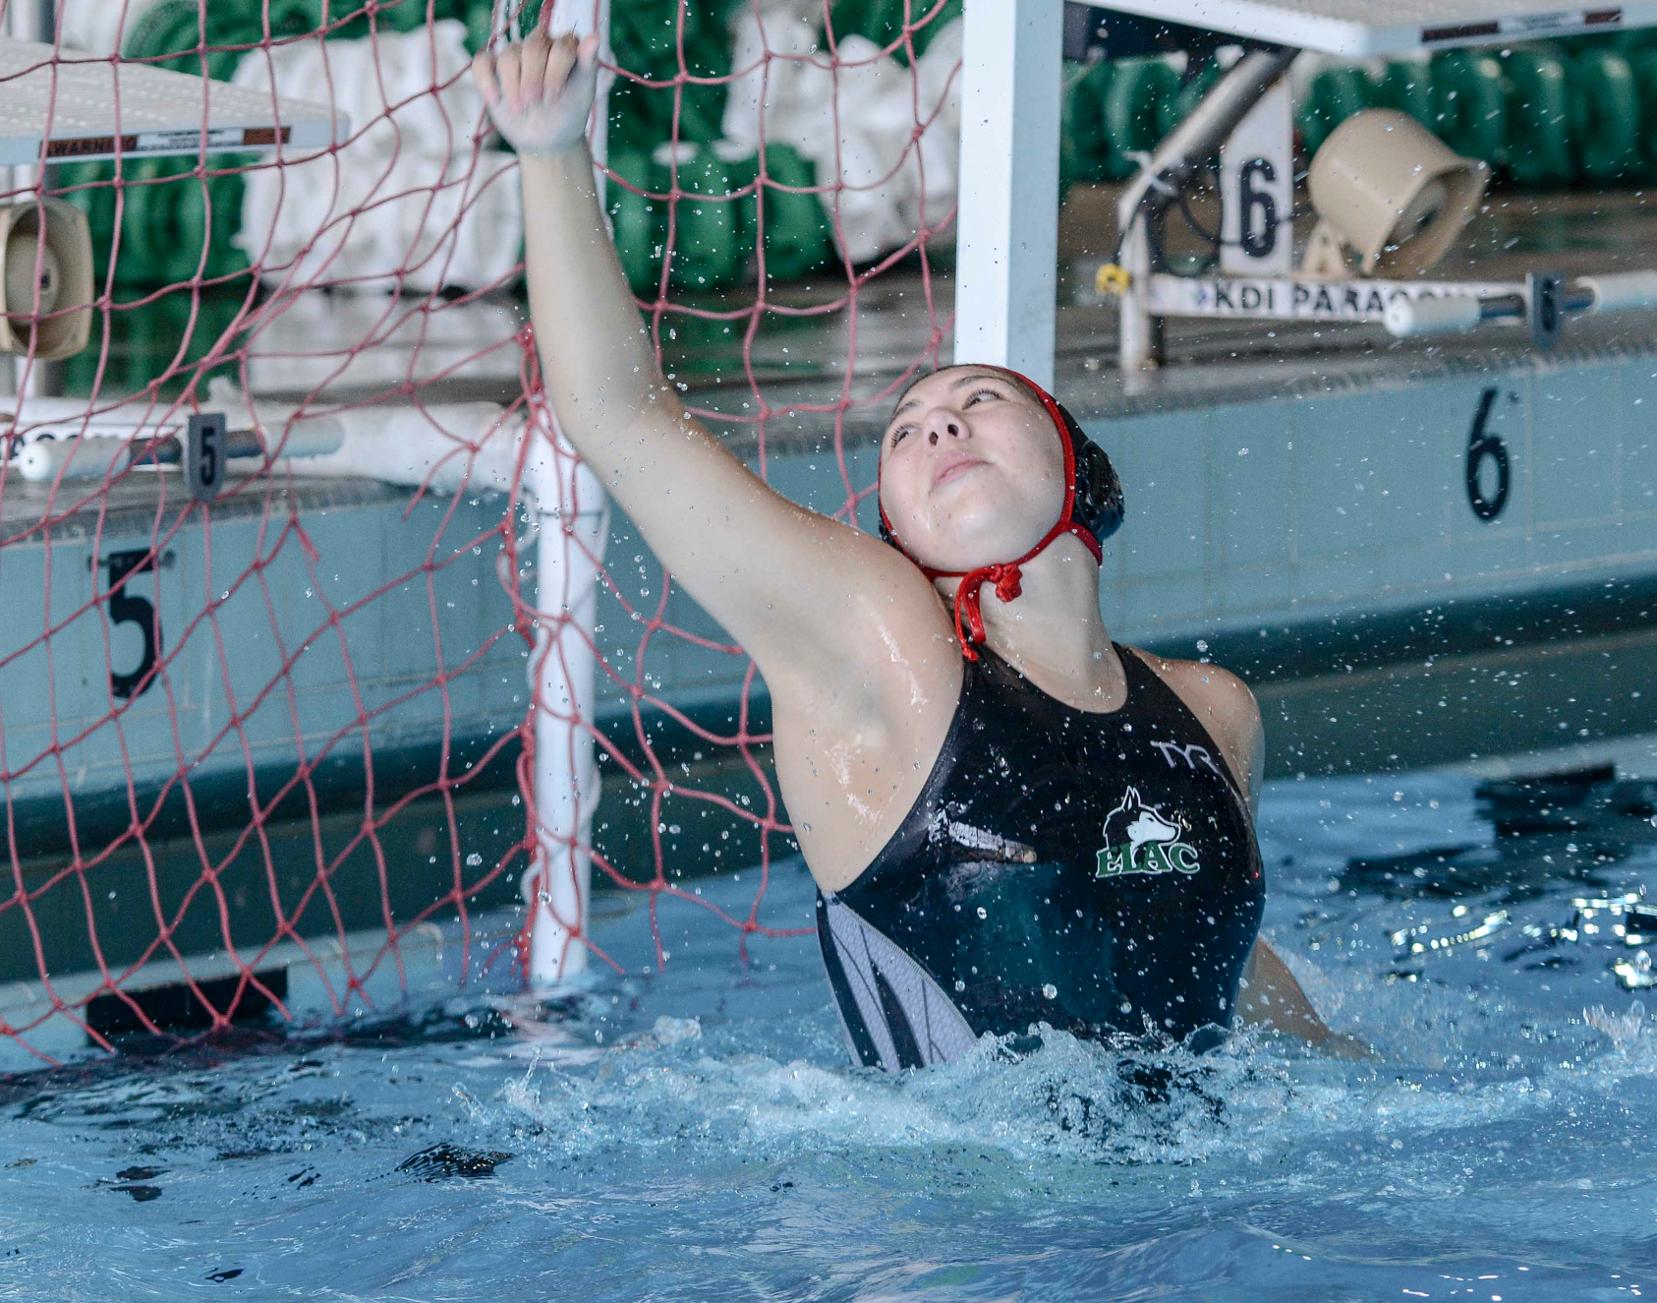 East Los Angeles College sophomore goalkeeper Krystal Ramirez (Schurr HS) pushes a goal attempt over the bar in a 15-10 Husky water polo loss to El Camino College, Wednesday Oct. 12. (Photo by Tadzio Garcia)